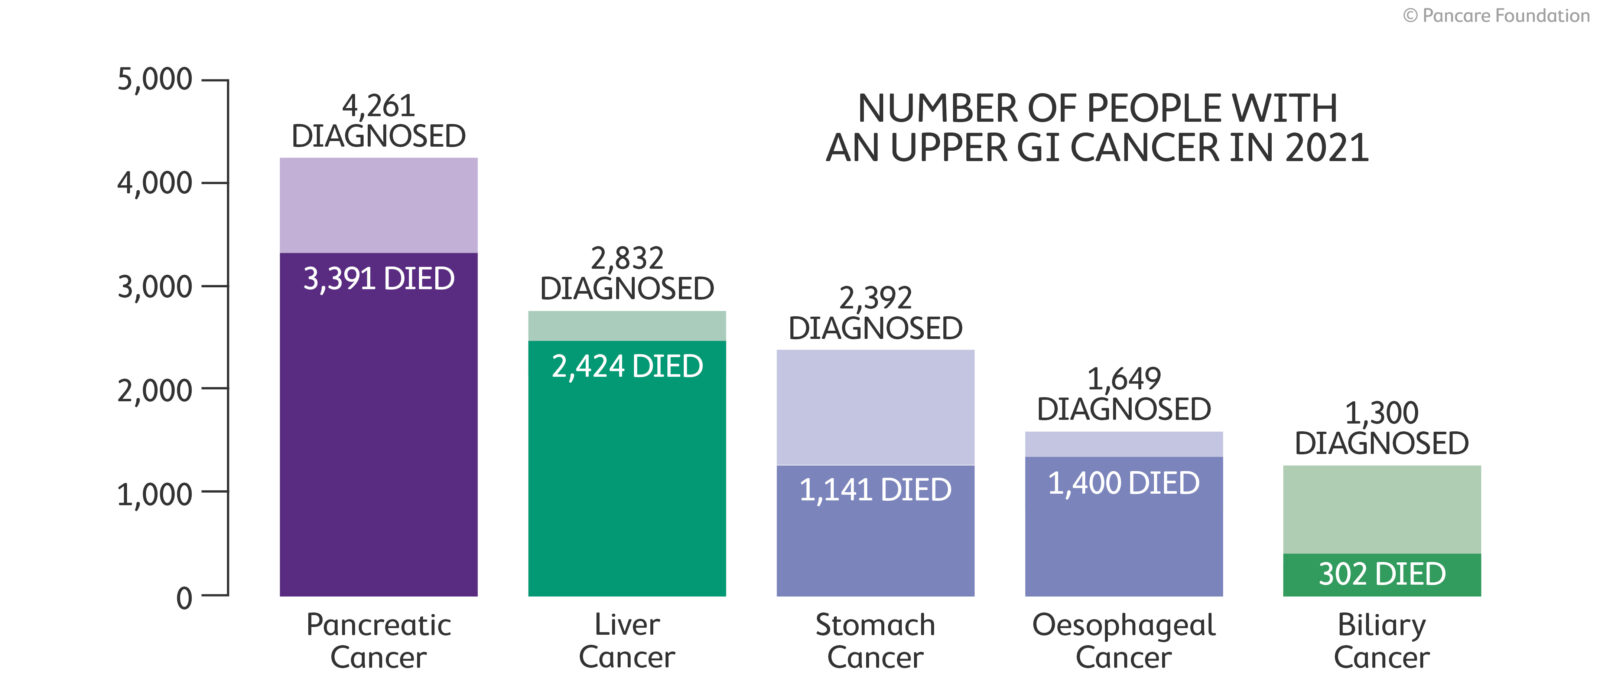 Number of people with an upper GI cancer in 2021